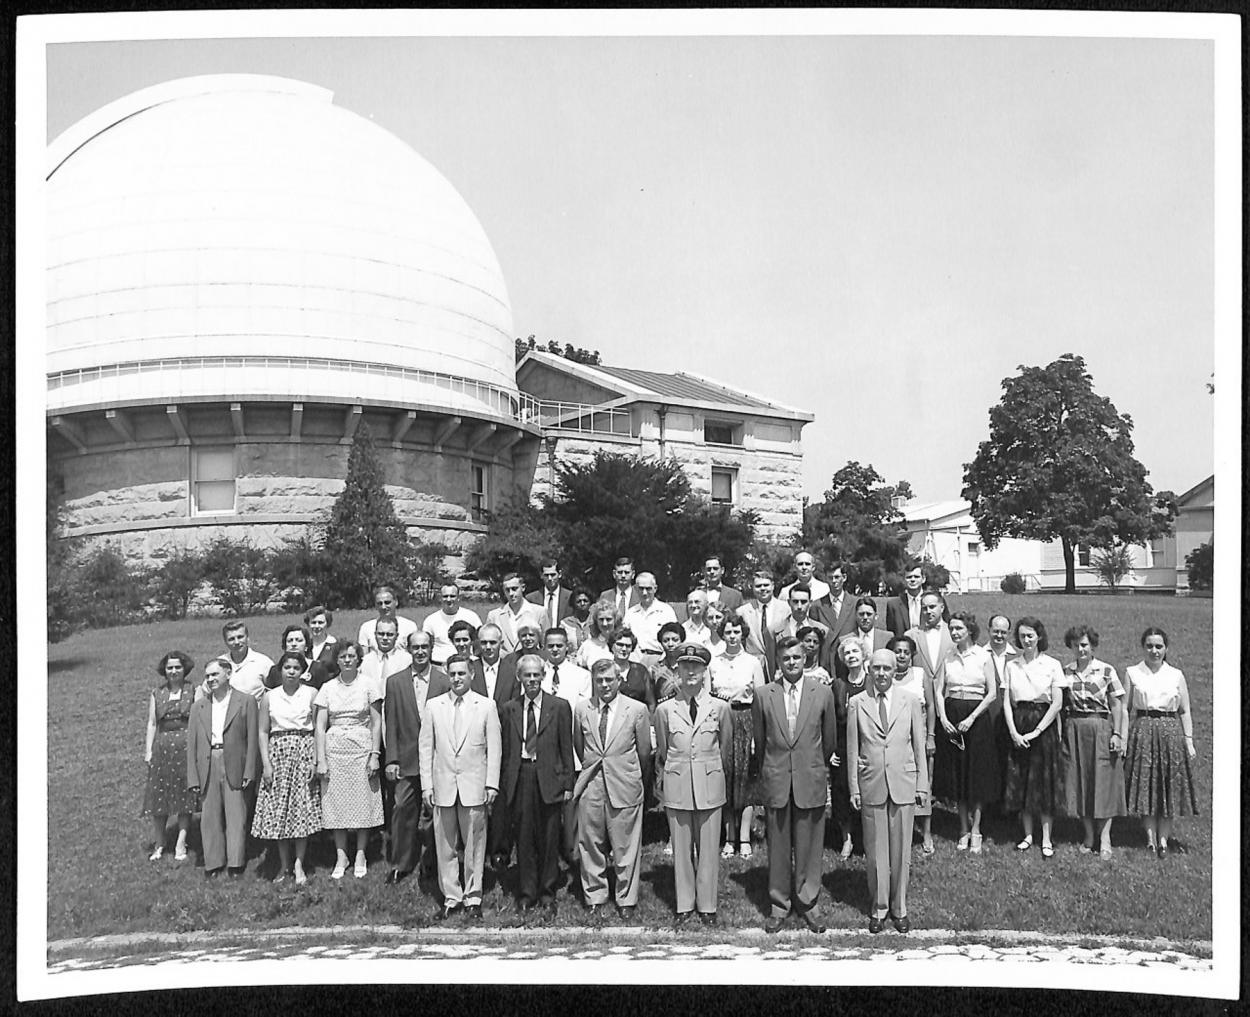 47 Employees of the U.S. Naval Observatory stand posed in front of one of the transit buildings. 